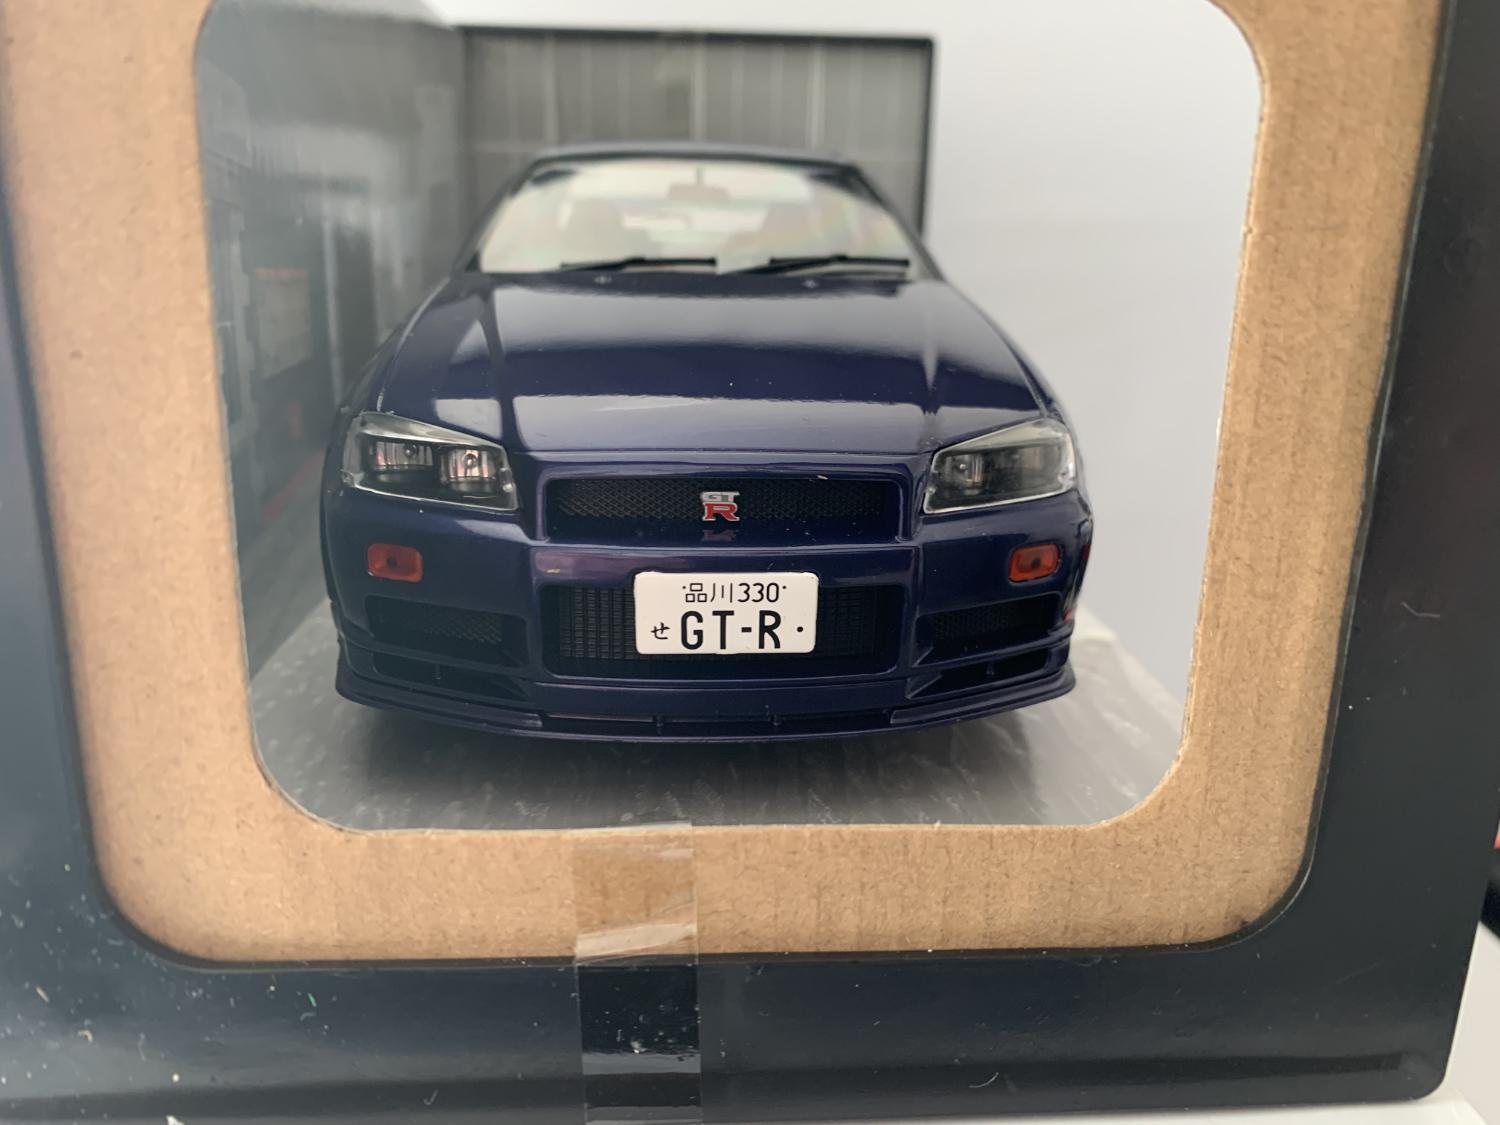 An excellent scale model of the Nissan Skyline GT-R (34) with high level of detail throughout, all authentically recreated.  Model is presented in a window display box.